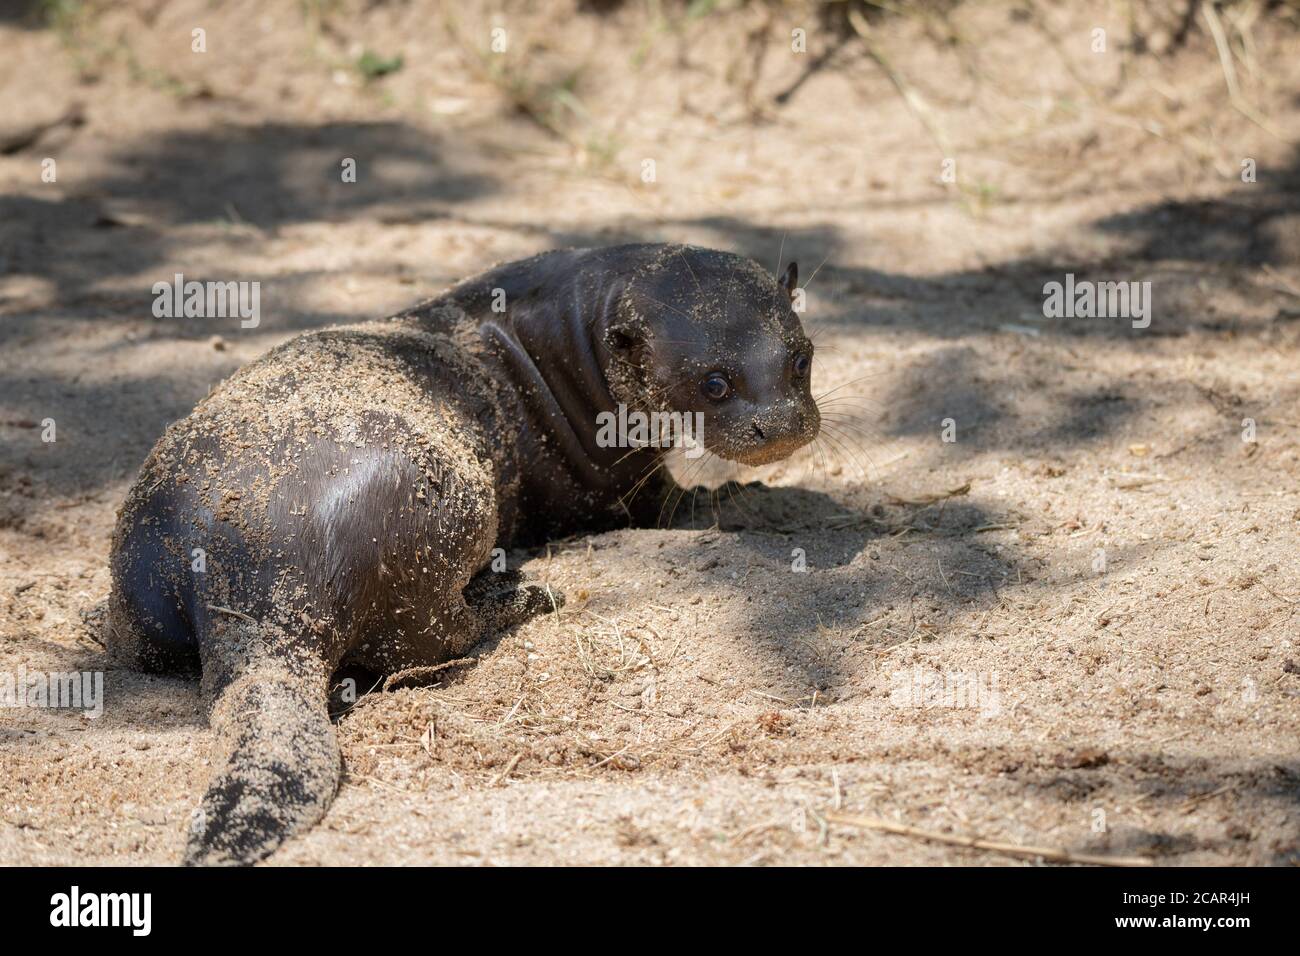 Young baby otter lying on the sand in the shadow in the wild Stock Photo